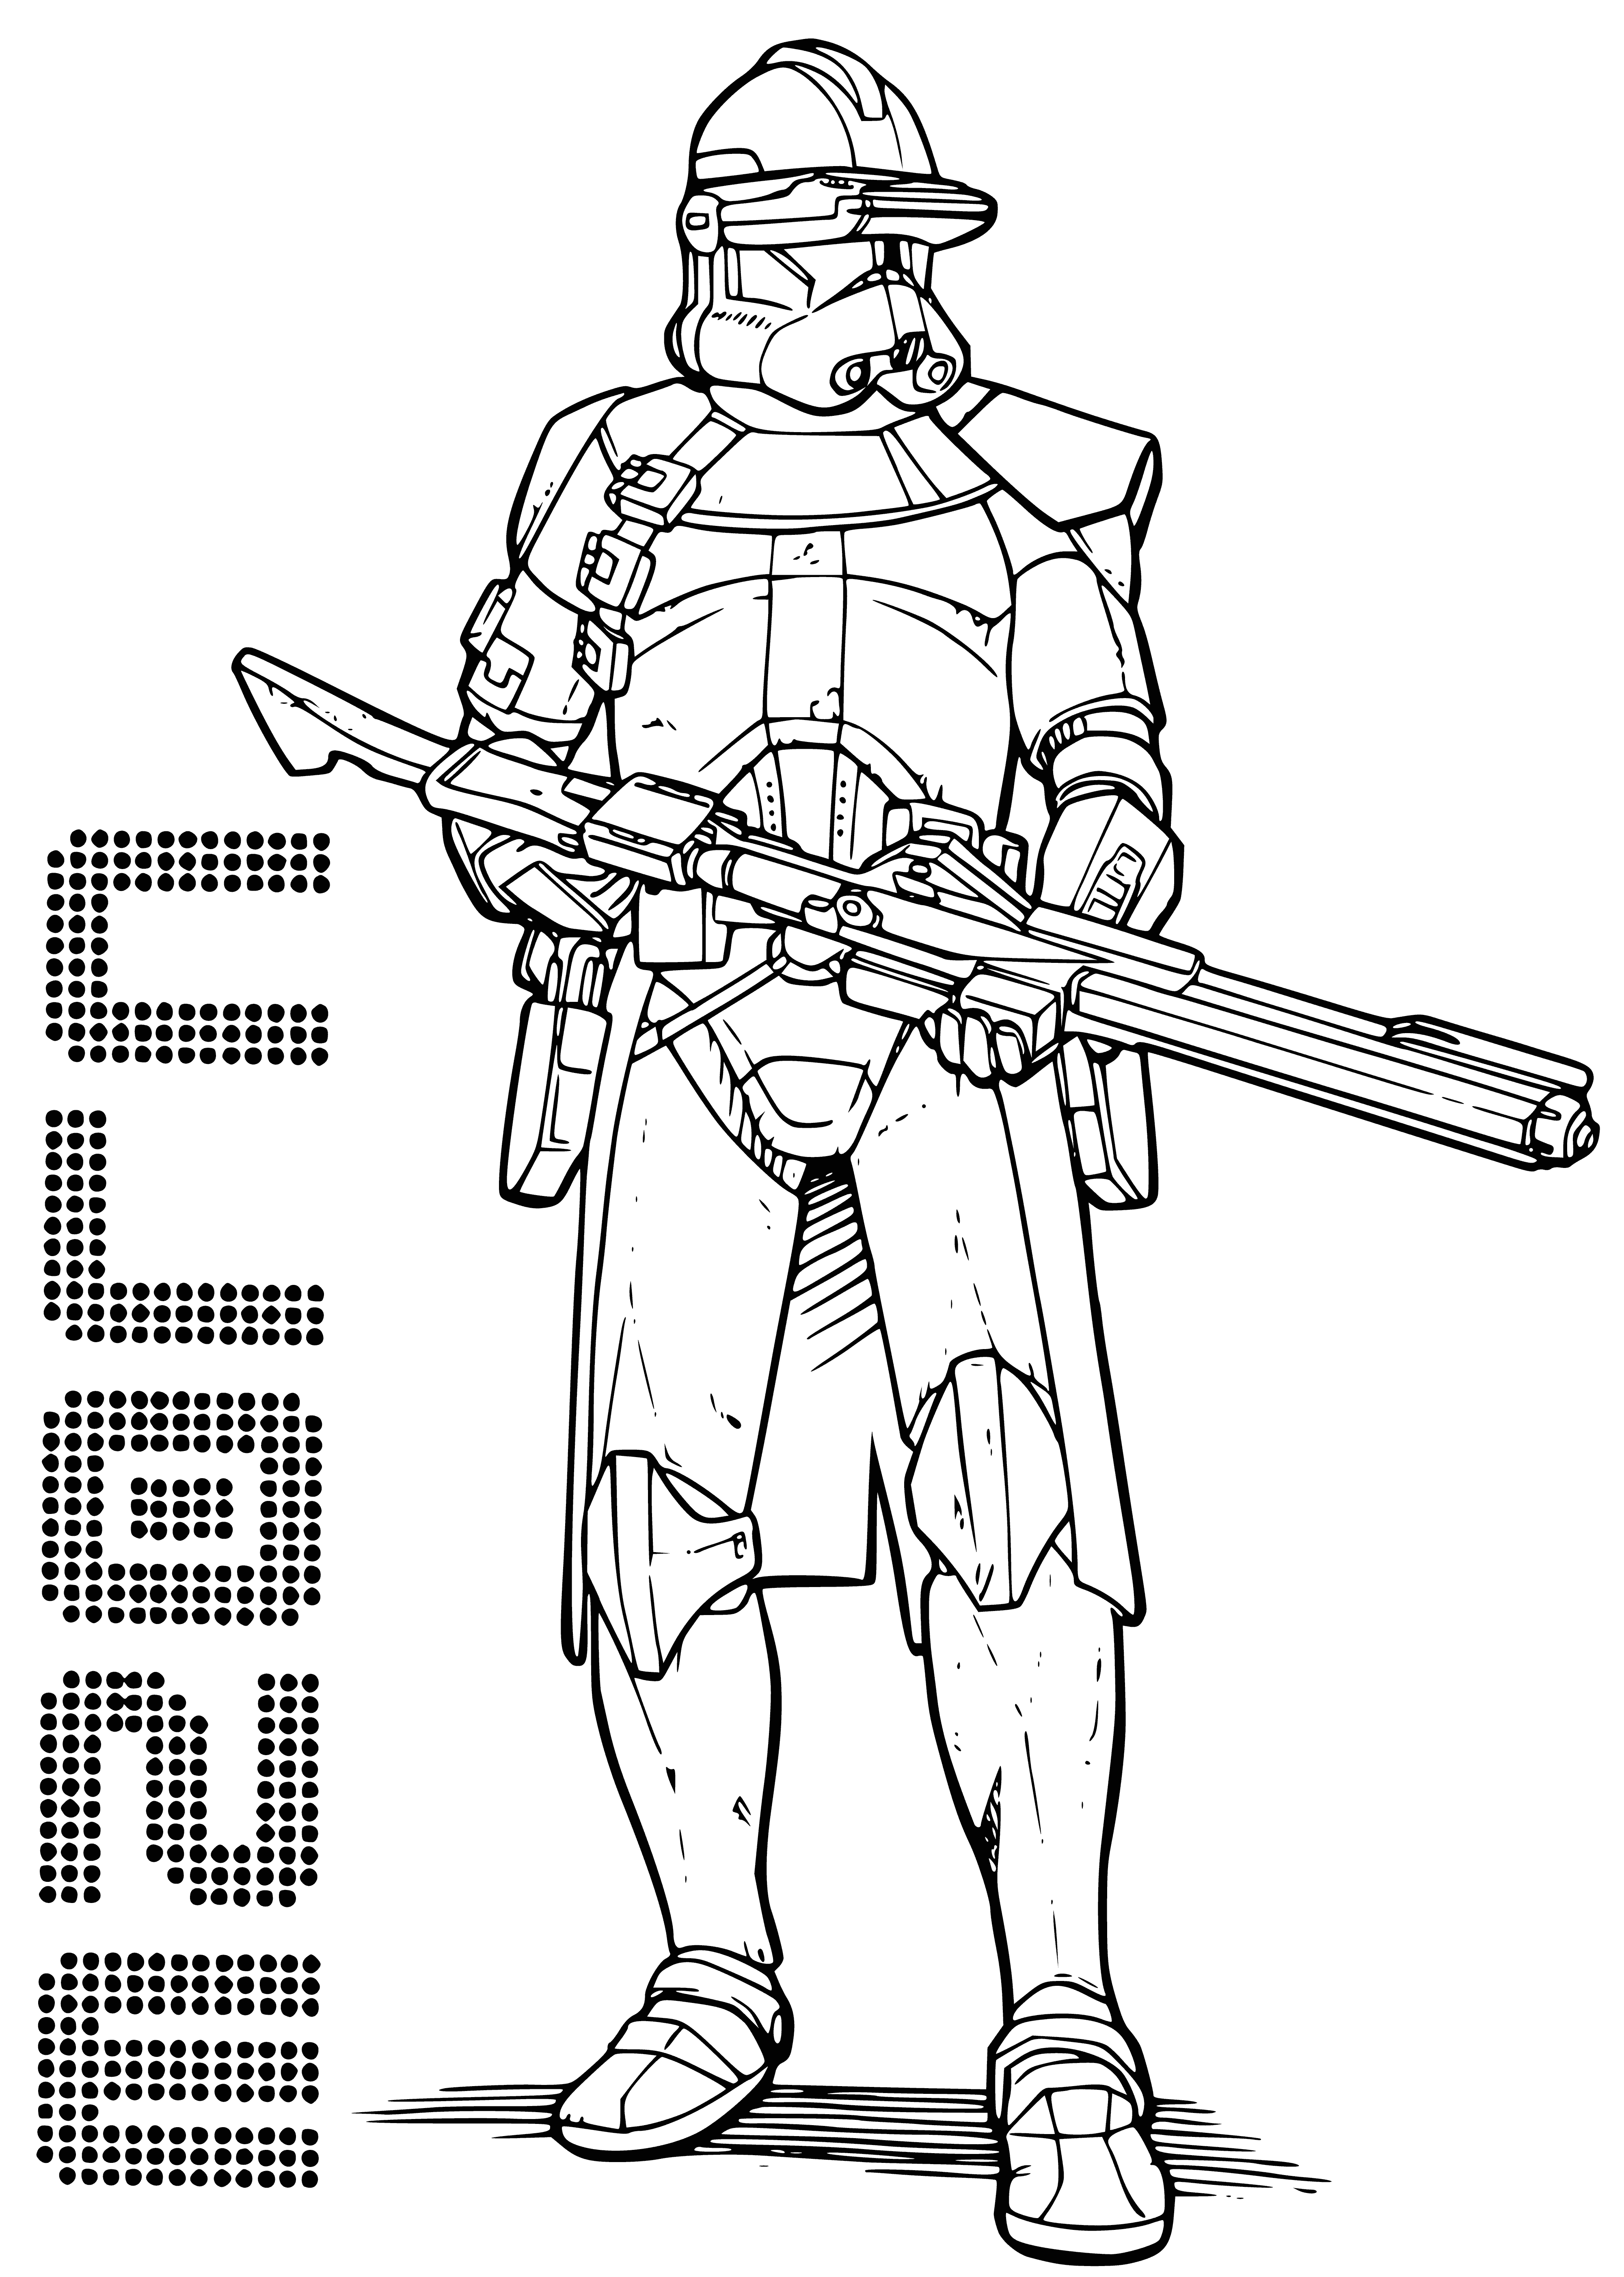 coloring page: Clone Commander Cody served the Republic during the Clone Wars, loyal/bravely protecting his men & a skilled strategist; under General Obi-Wan Kenobi.